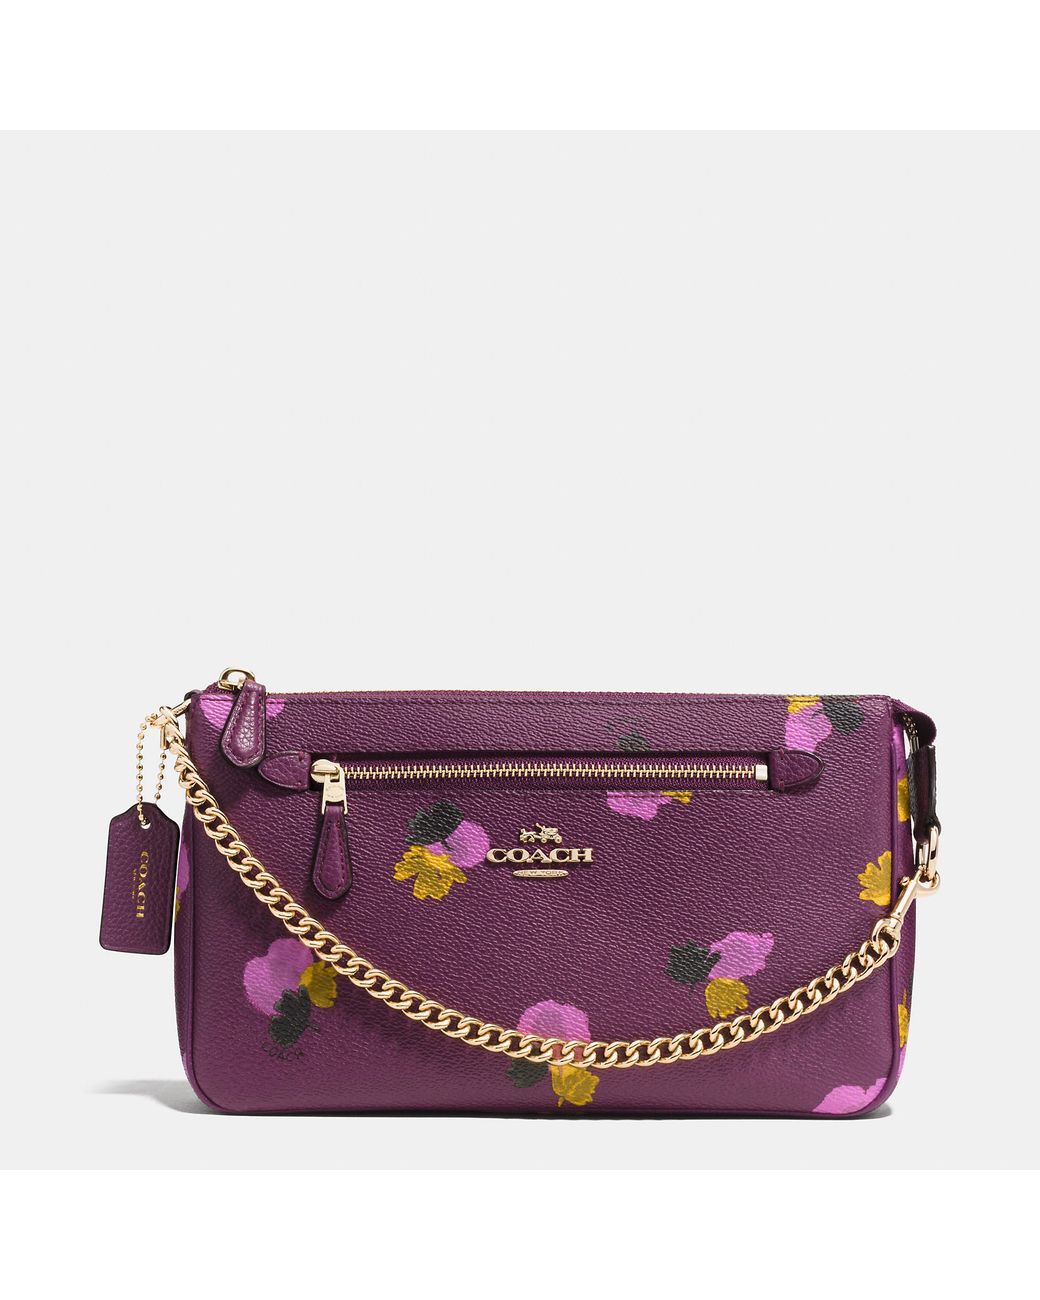 Coach, Bags, Classic Coach Wristlet Signature Brown Canvas With Pop Of  Pink Colour